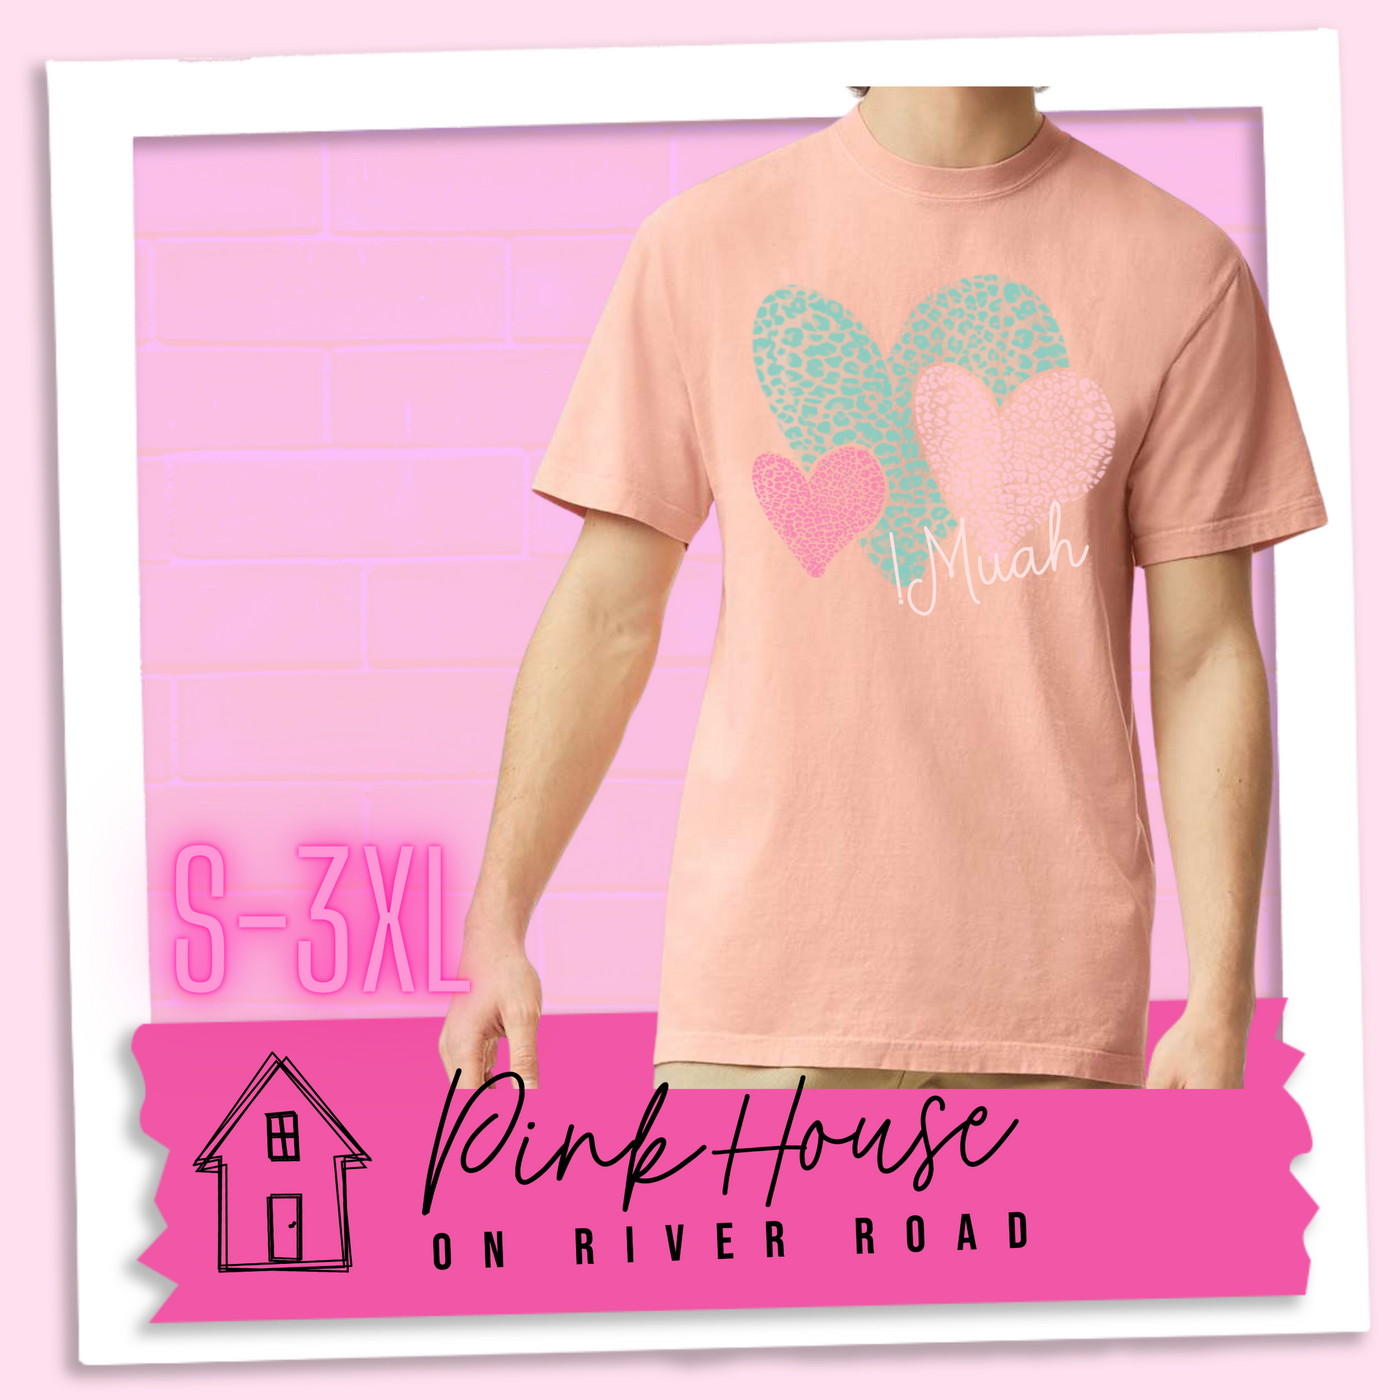 Peachy tee with 3 different colored leopard print hearts in various sizes in the lower right hand corner of the graphic is the word Muah in light punk script